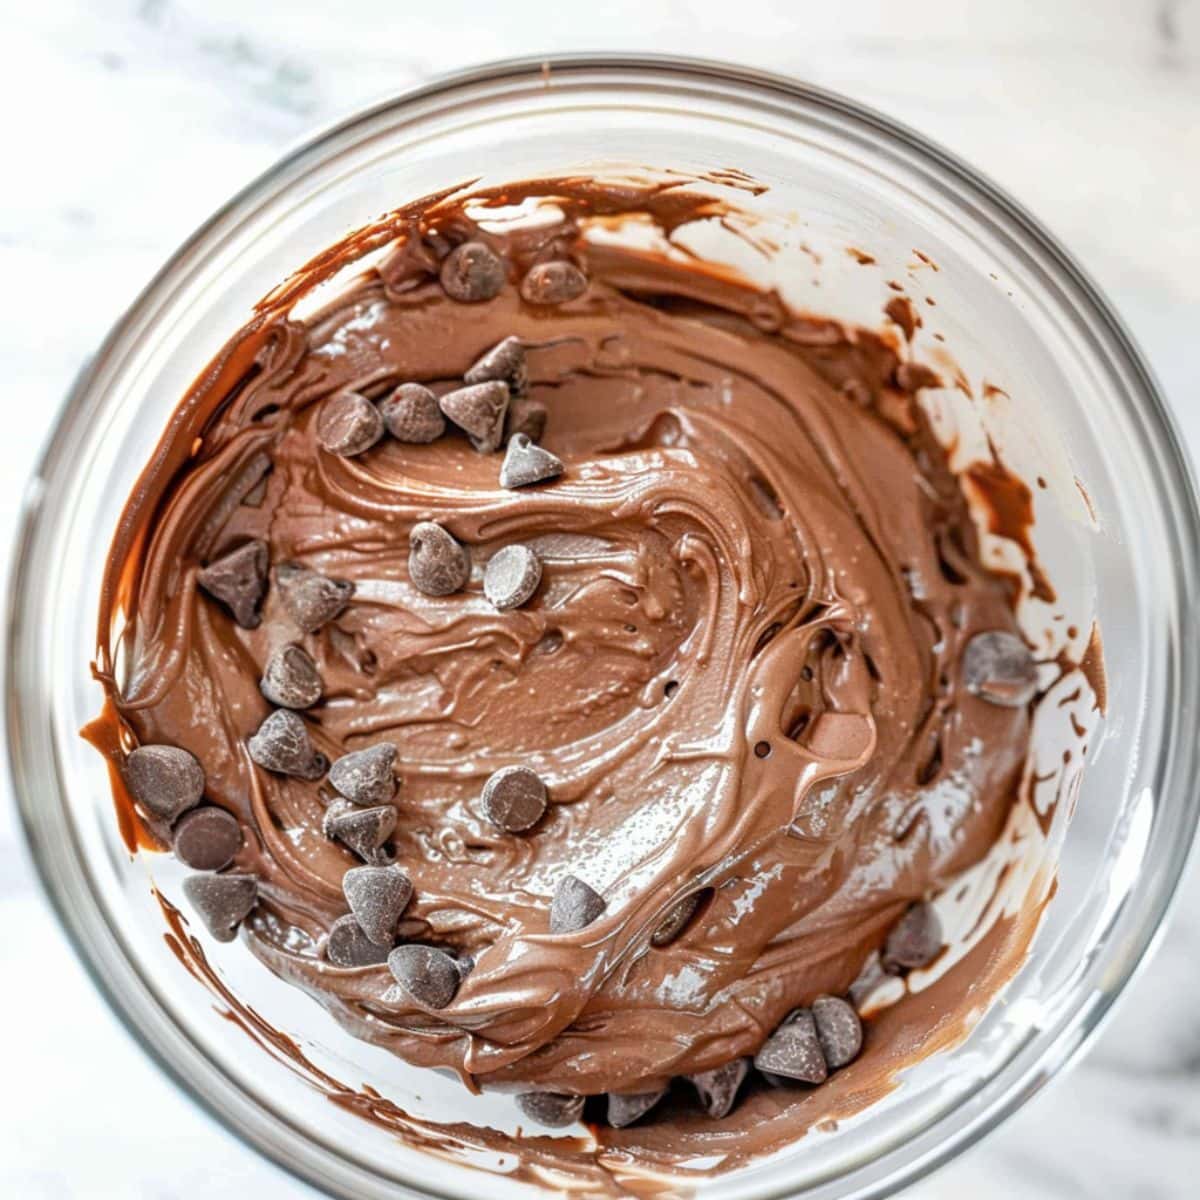 Brownie batter dip with chocolate chips mixed in a glass bowl.